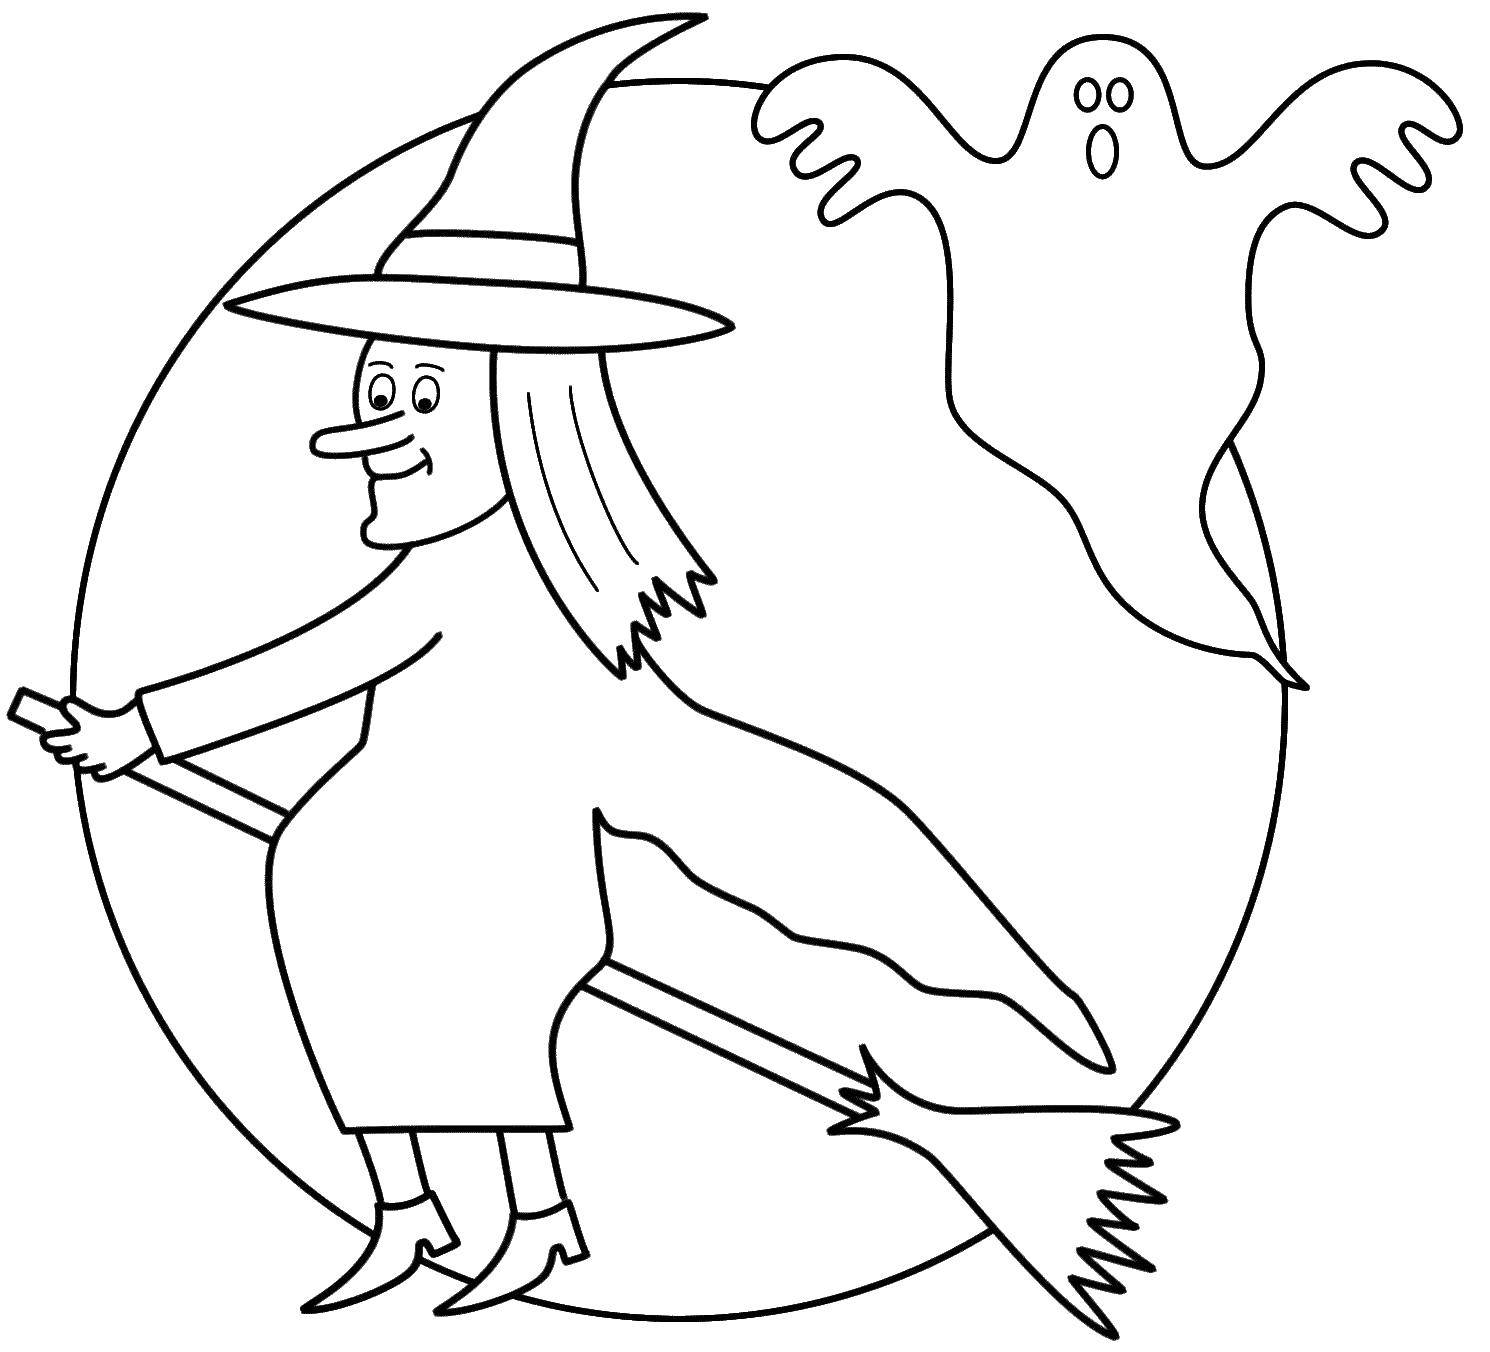 Coloring Witch Ghost. Category witch. Tags:  moon, Ghost, witch, broom.